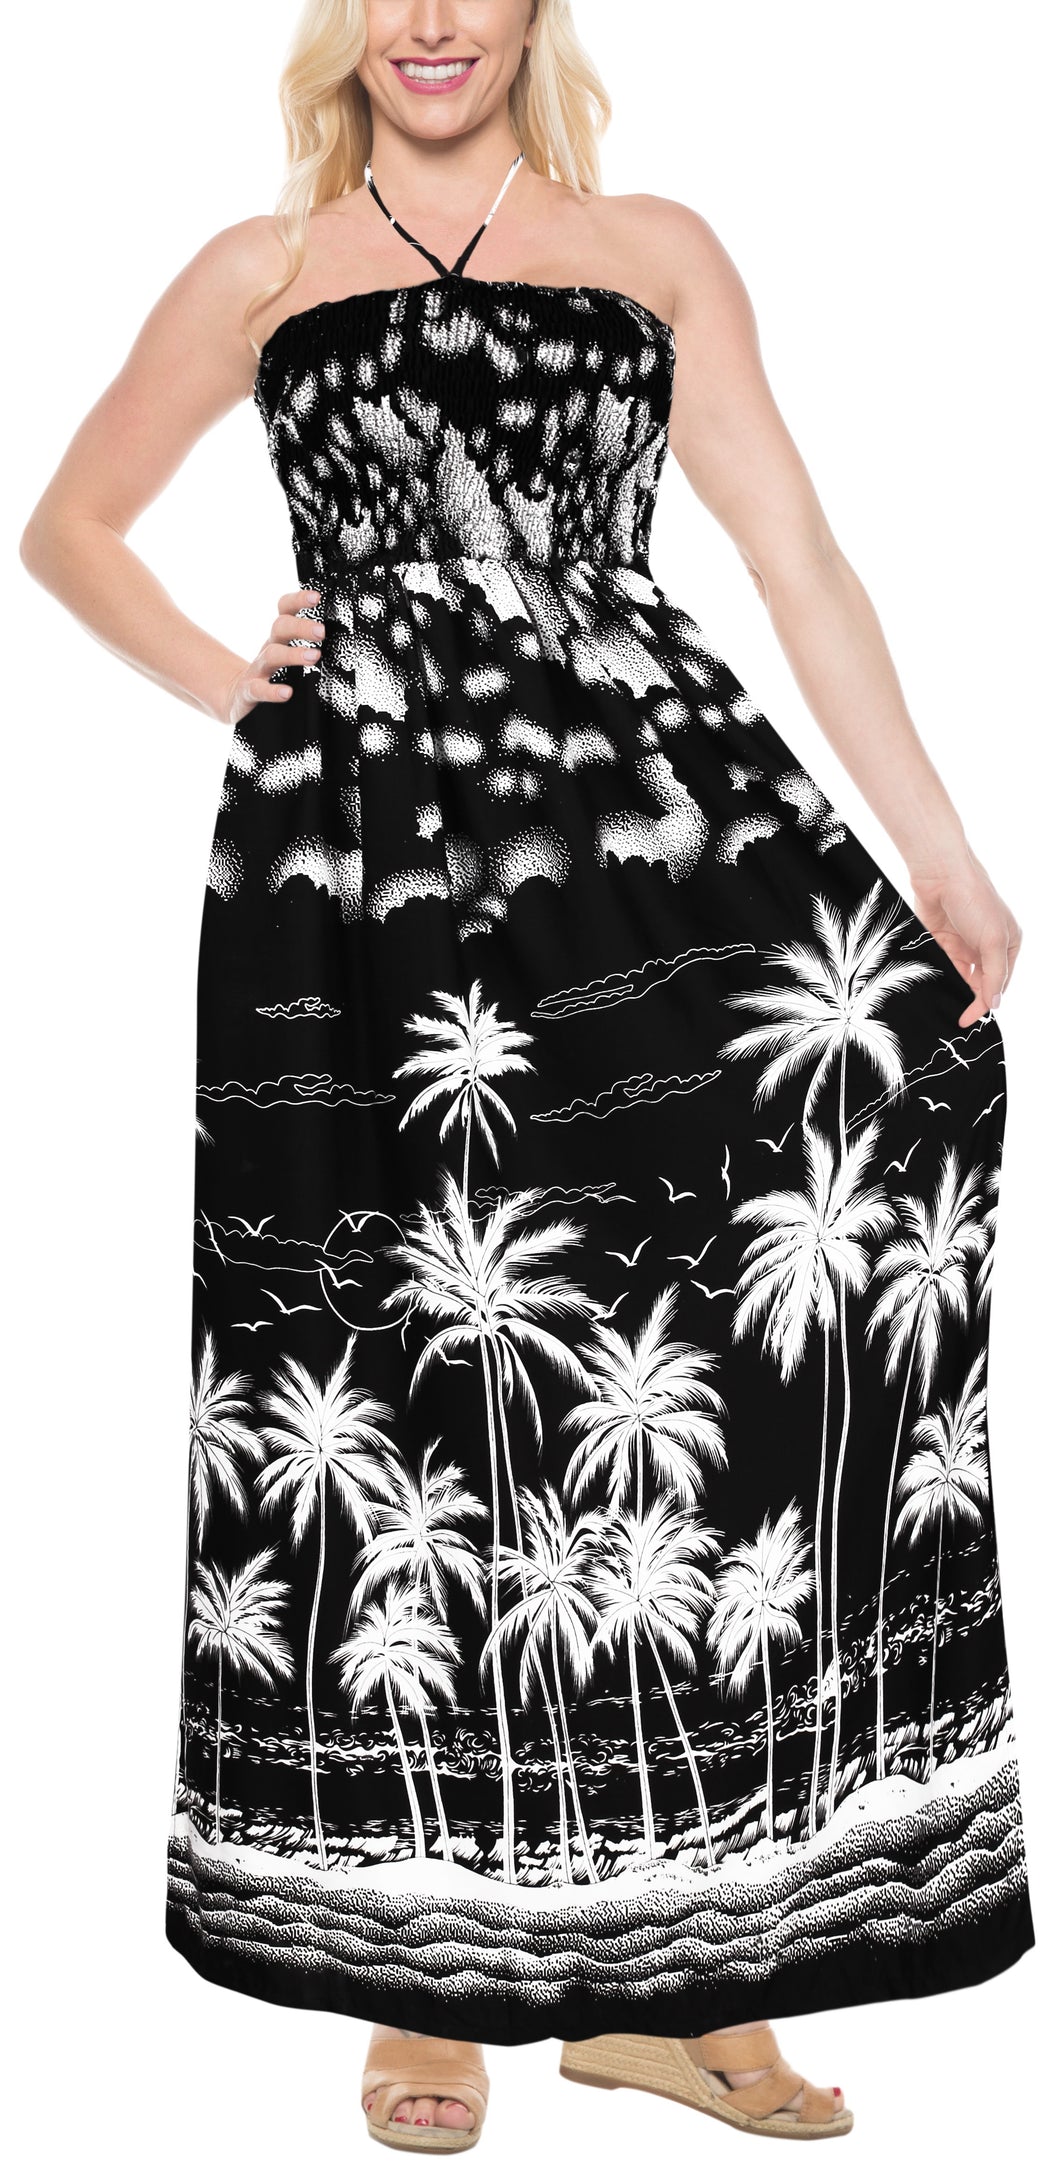 LA LEELA Long Maxi Hawaiian Halter Neck Tube Dress For Women Beach Pool Party Casual Outfits Ladies Summer Outing Wear